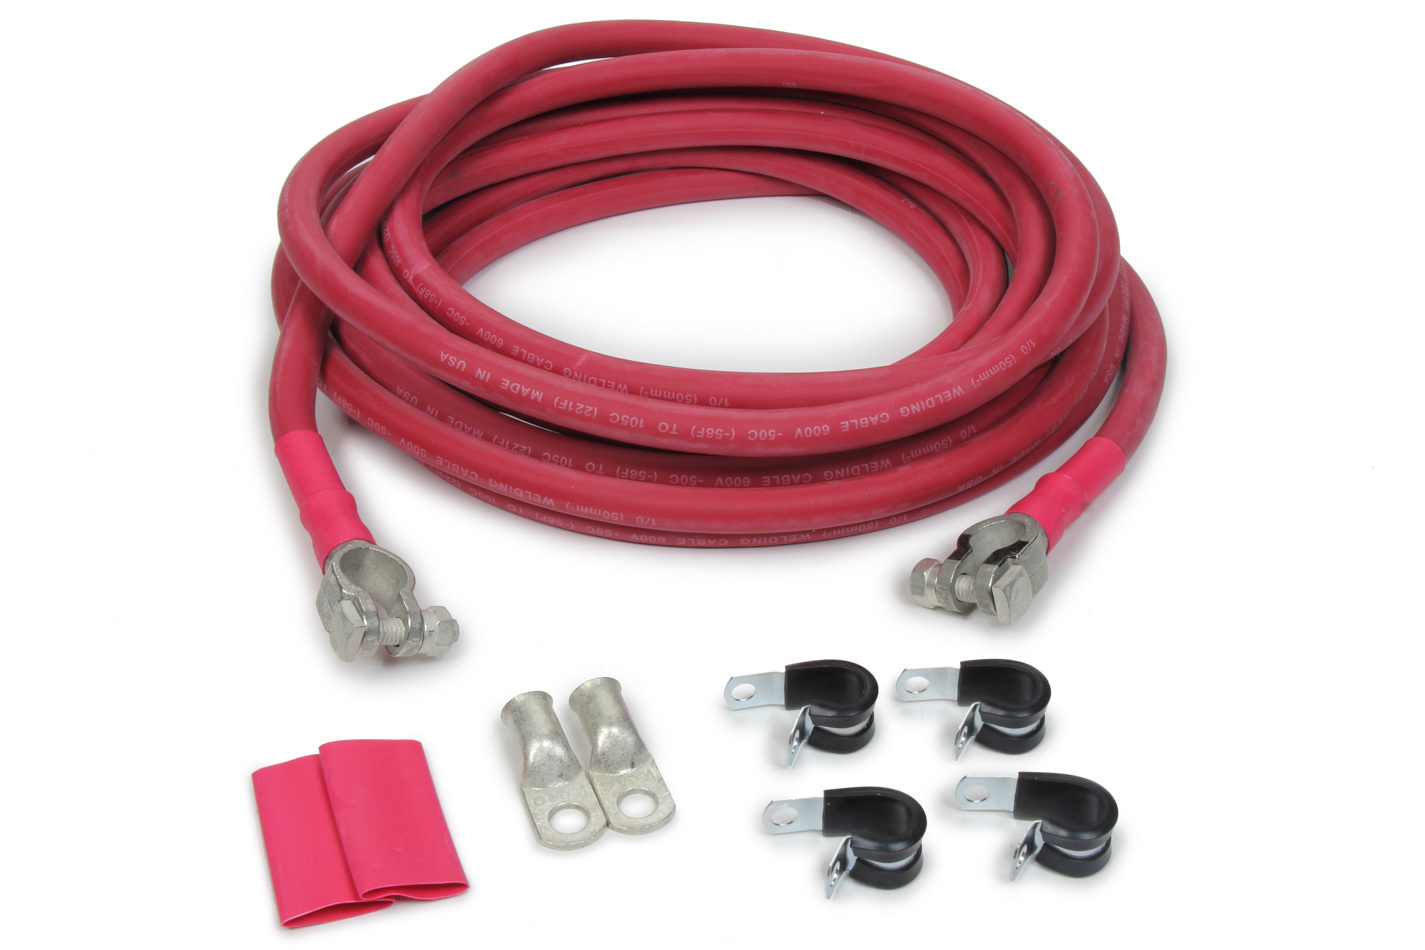 Taylor Cable 21540 Battery Cable, 1/0 Gauge, 20 ft, 4 Terminals, Shrink Tubing / Ring Terminals Included, Copper, Red, Kit